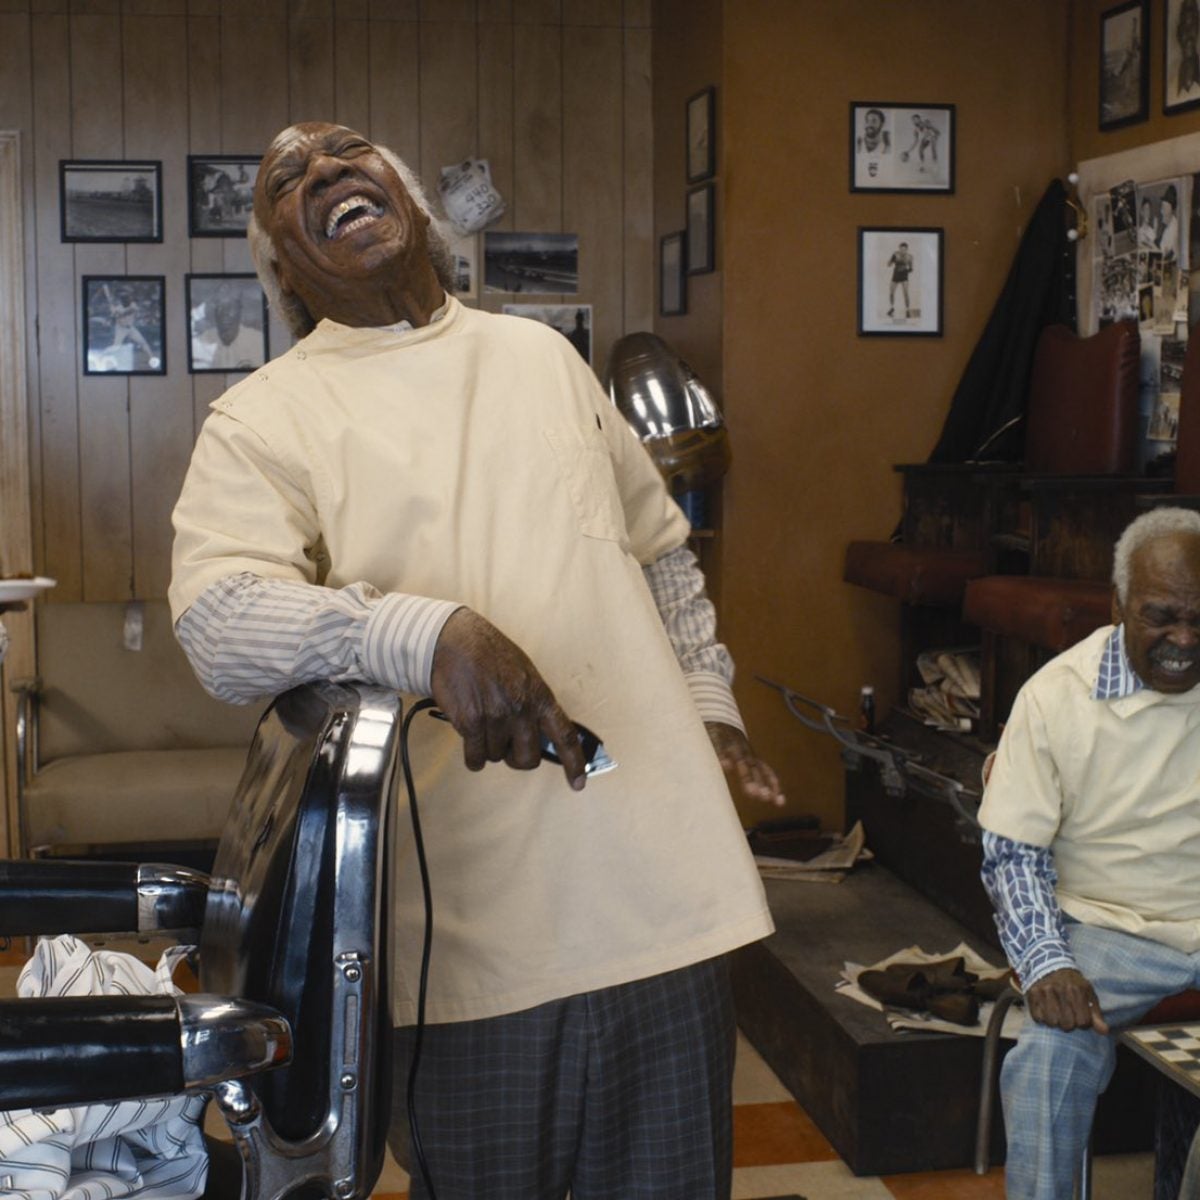 Watch The First Official Trailer For 'Coming 2 America'